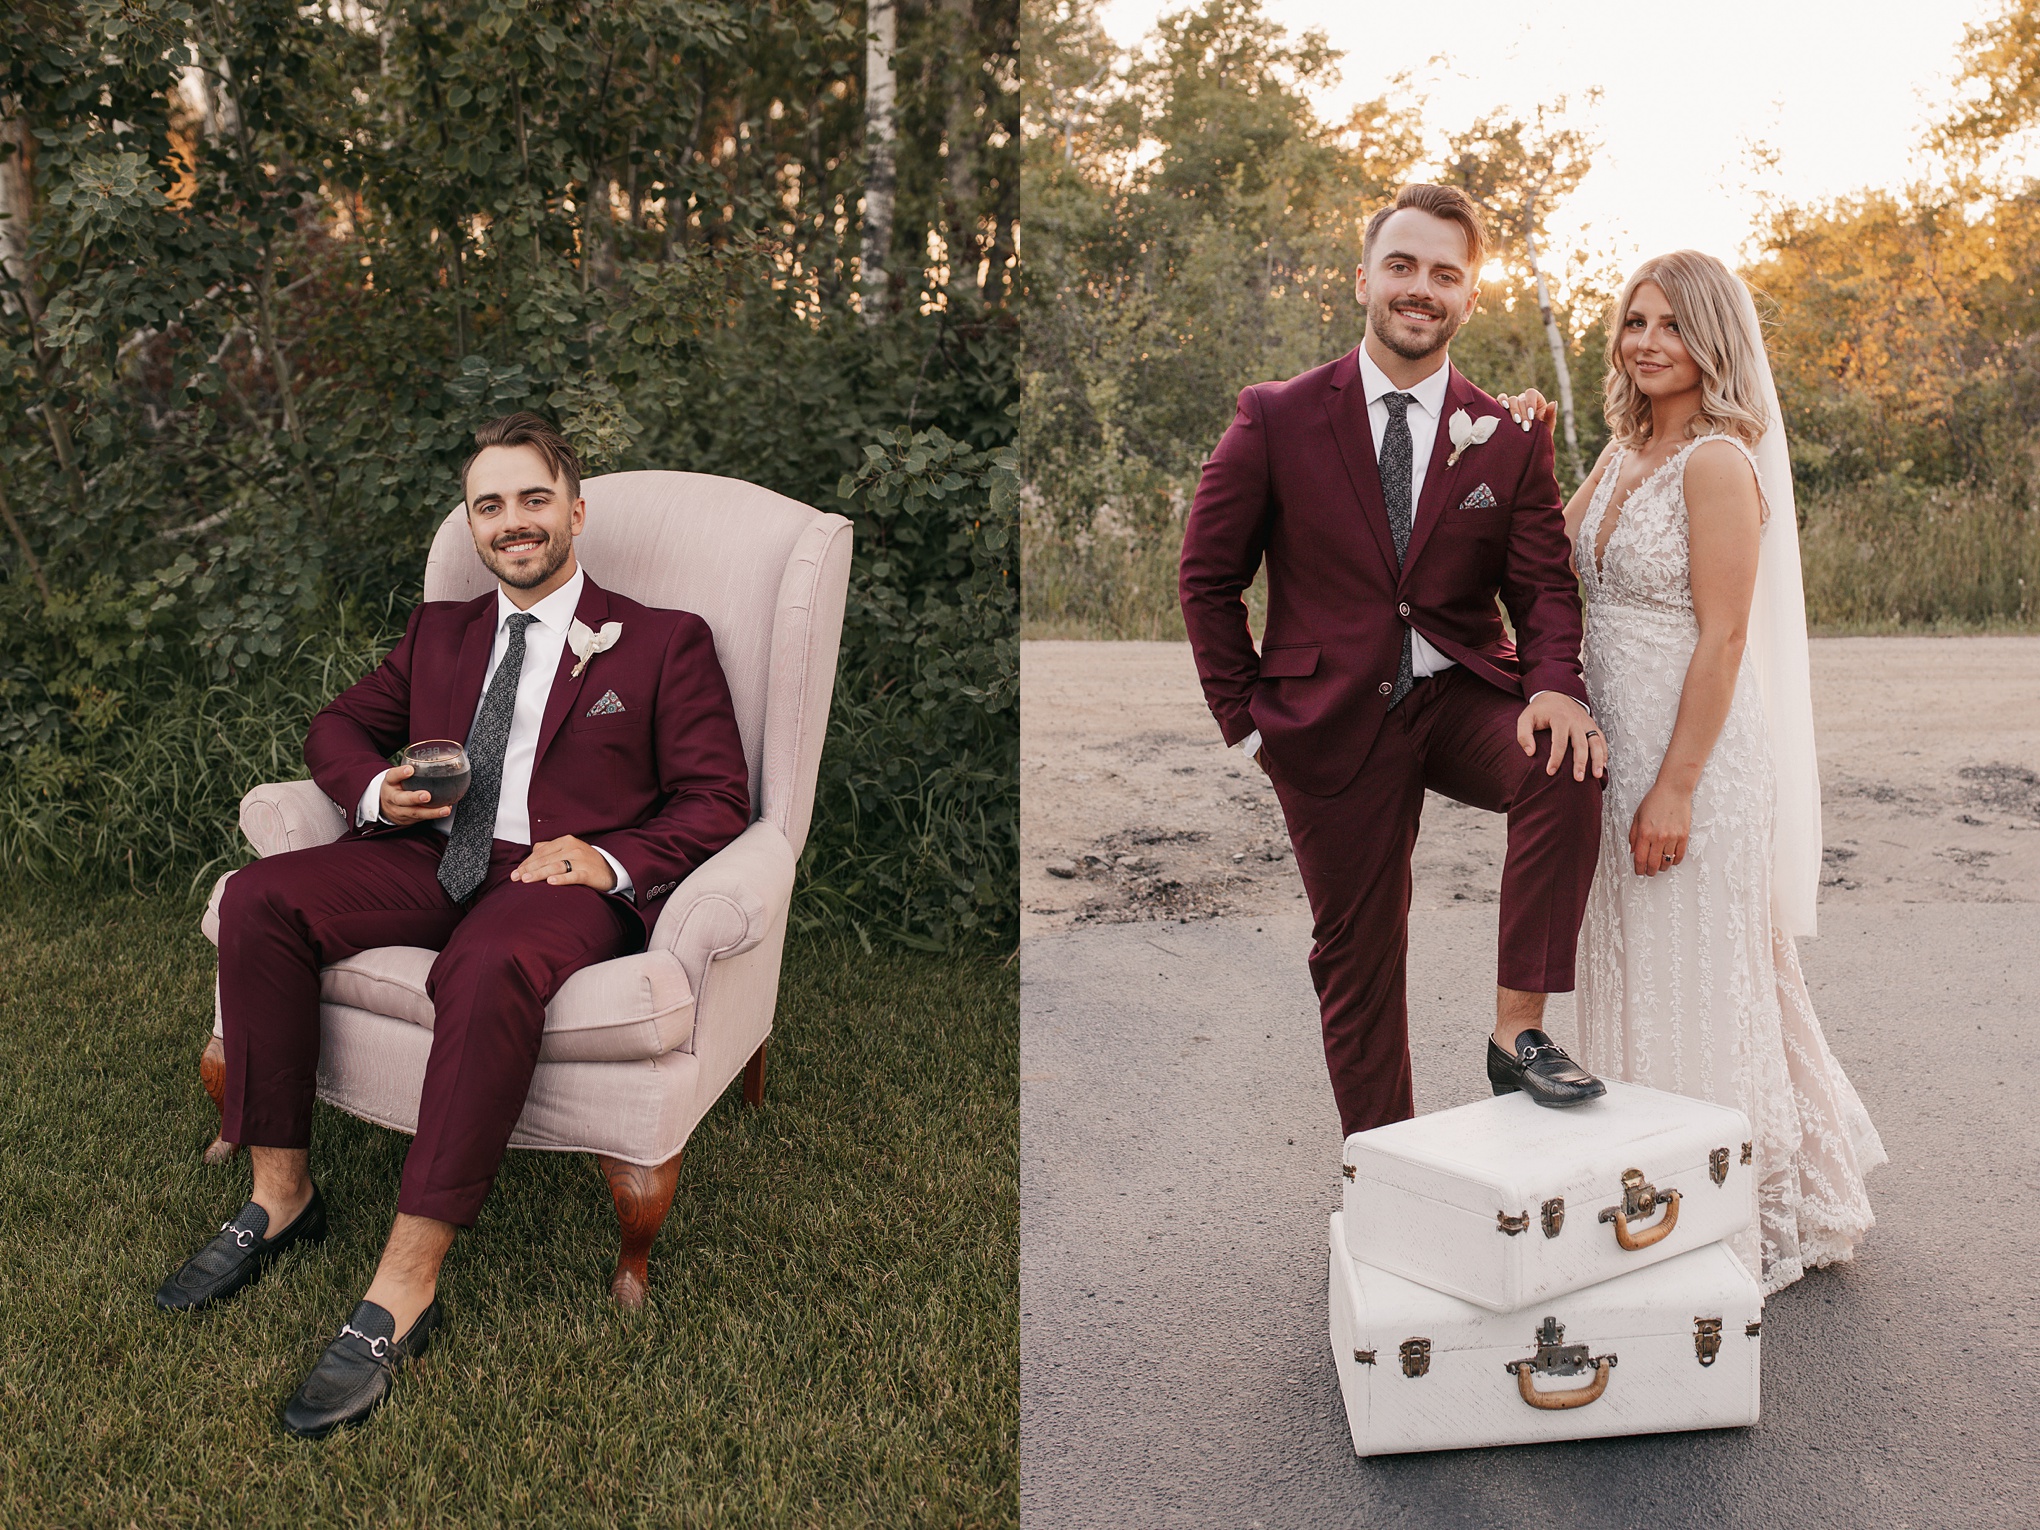 Incorporating furniture into your wedding day